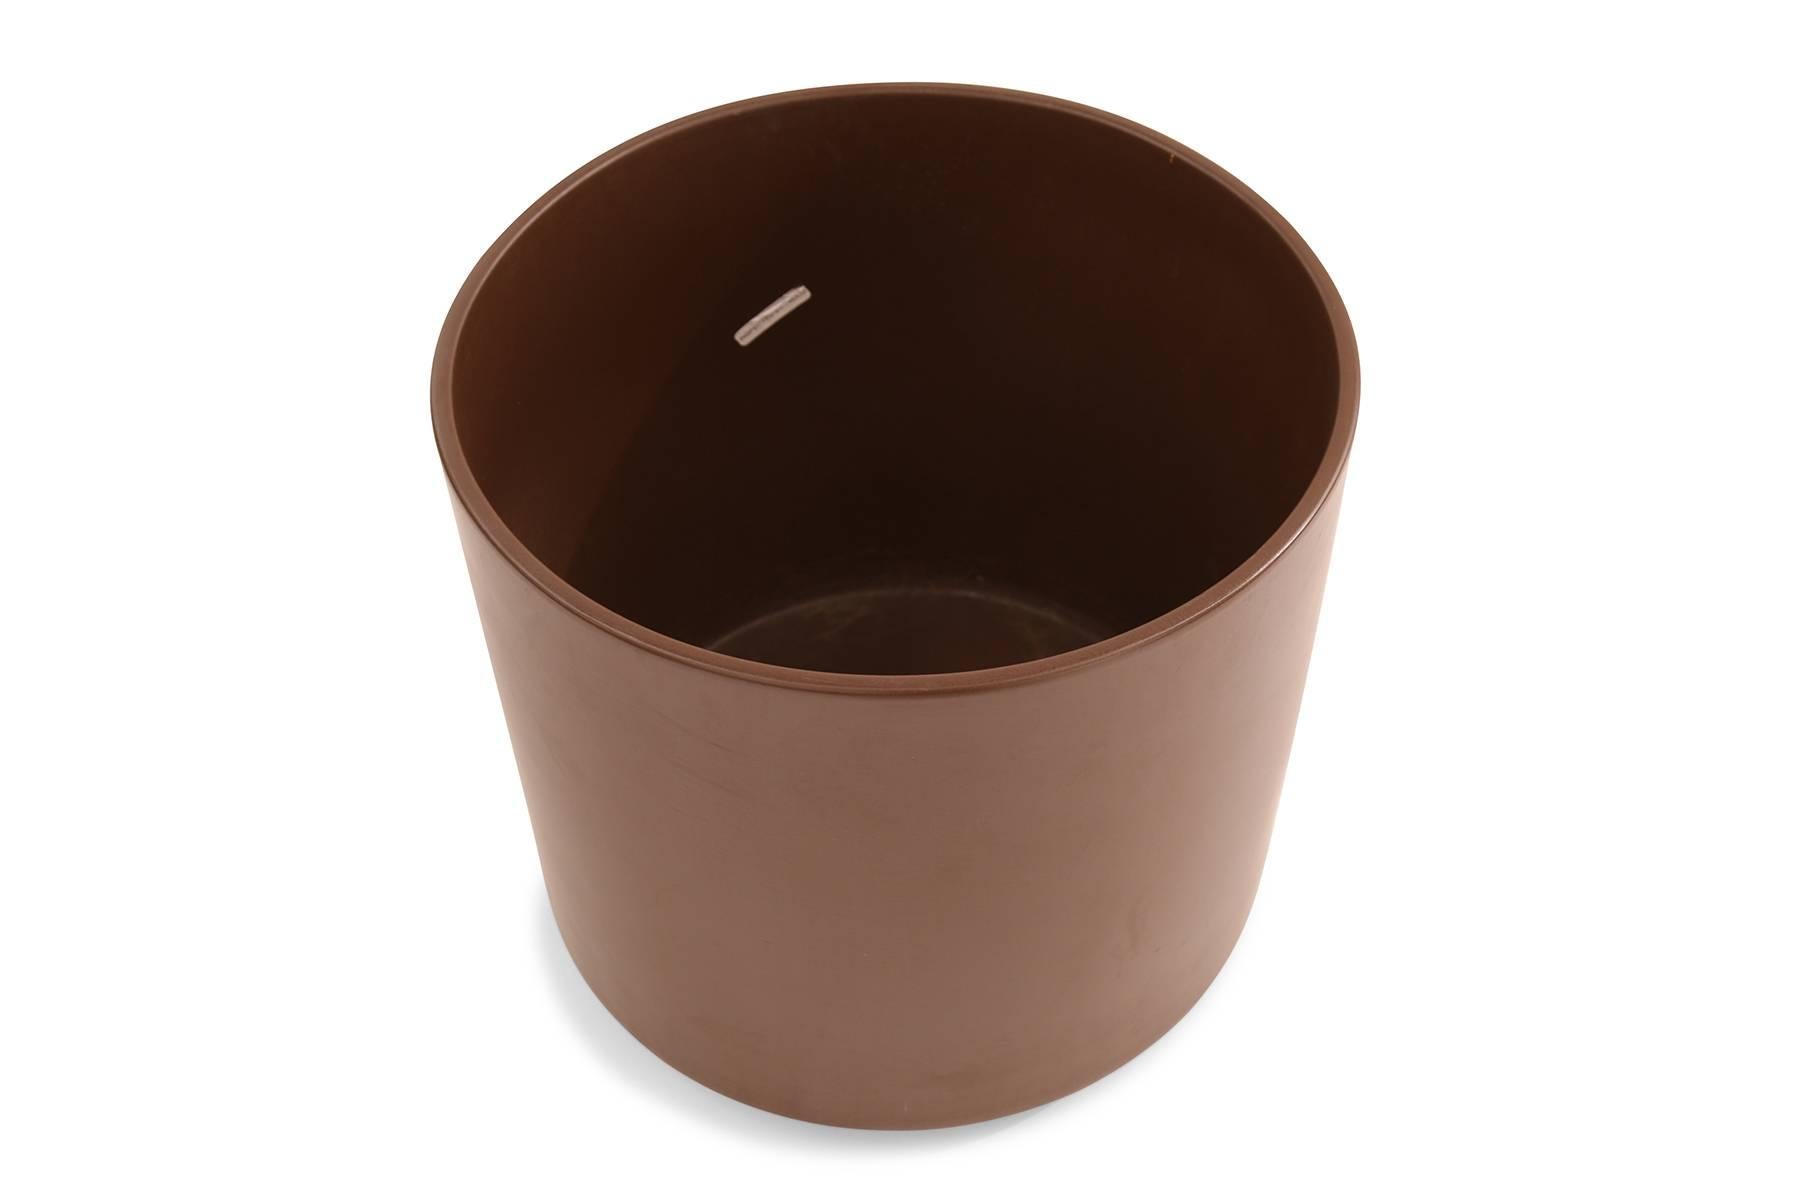 Five large-scale Gainey planters or pots, circa early 1980s. These examples have a milk chocolate glaze and each measure: 17